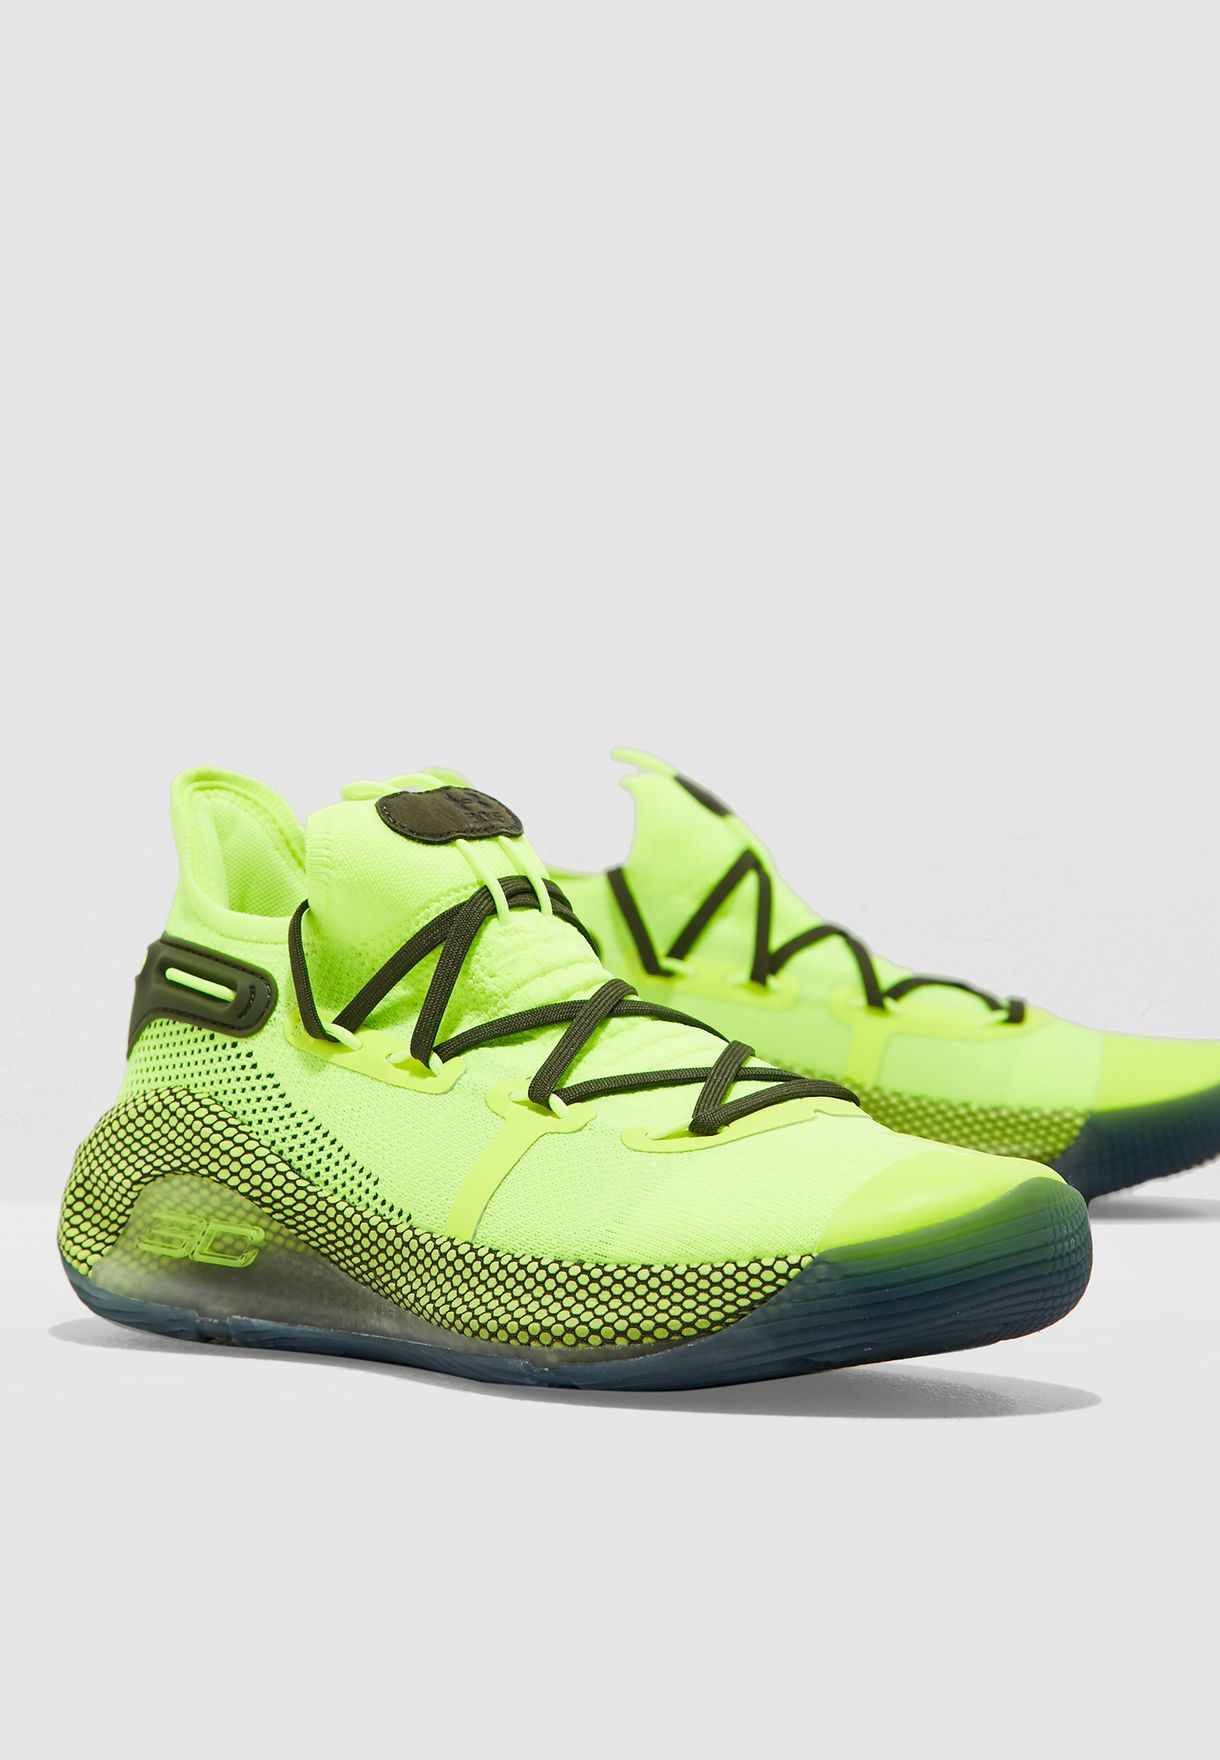 stephen curry shoes 1 men green Sale,up 